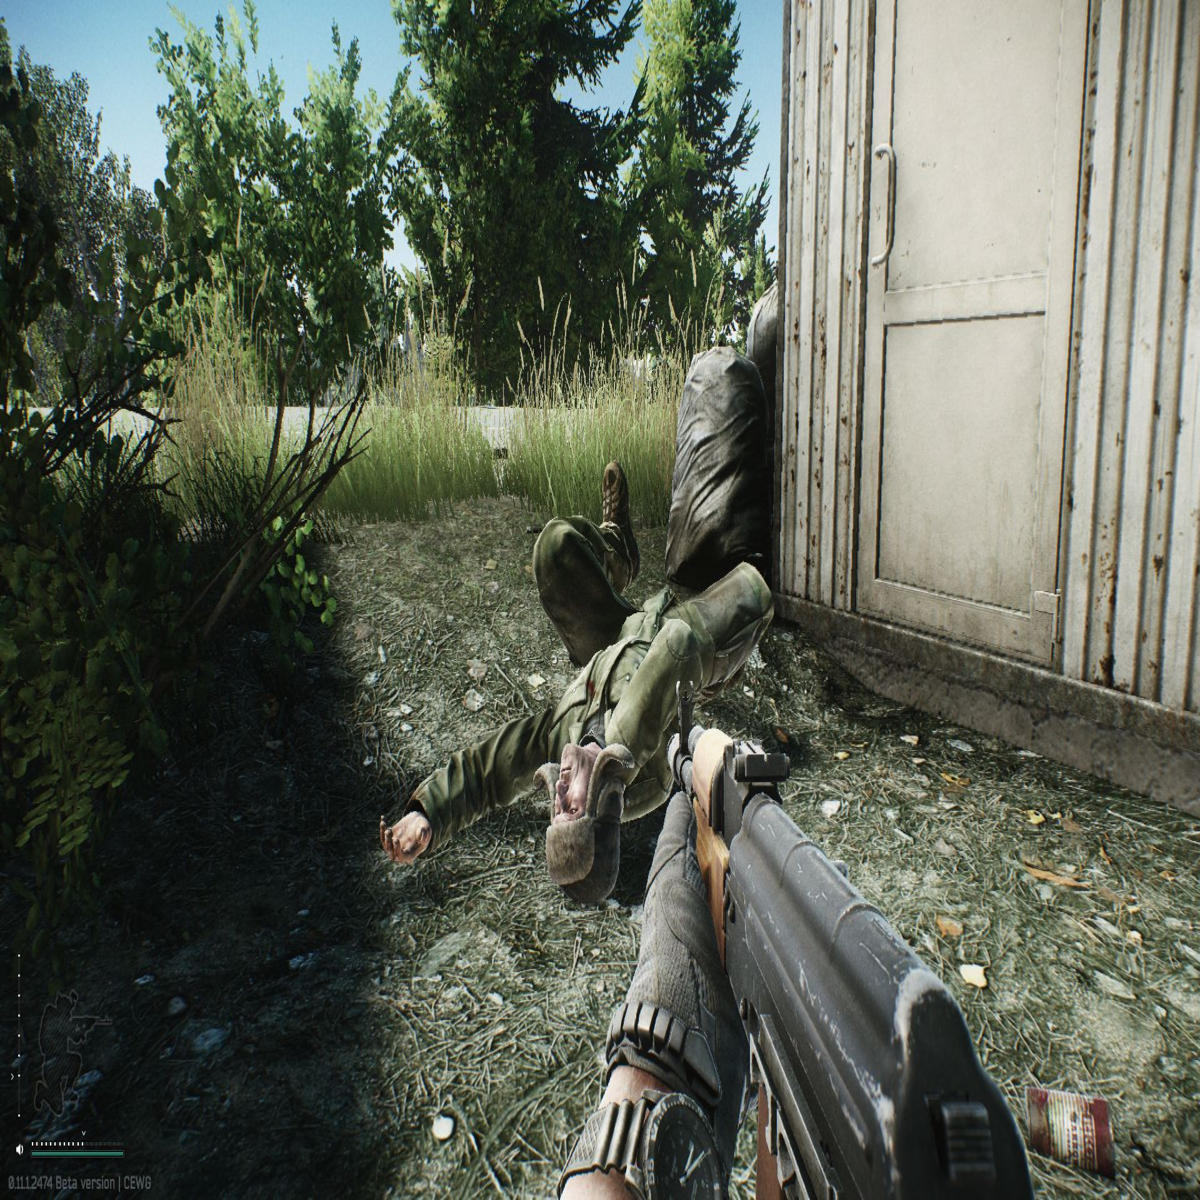 Battlestate Games refuse to put women in Escape from Tarkov, say